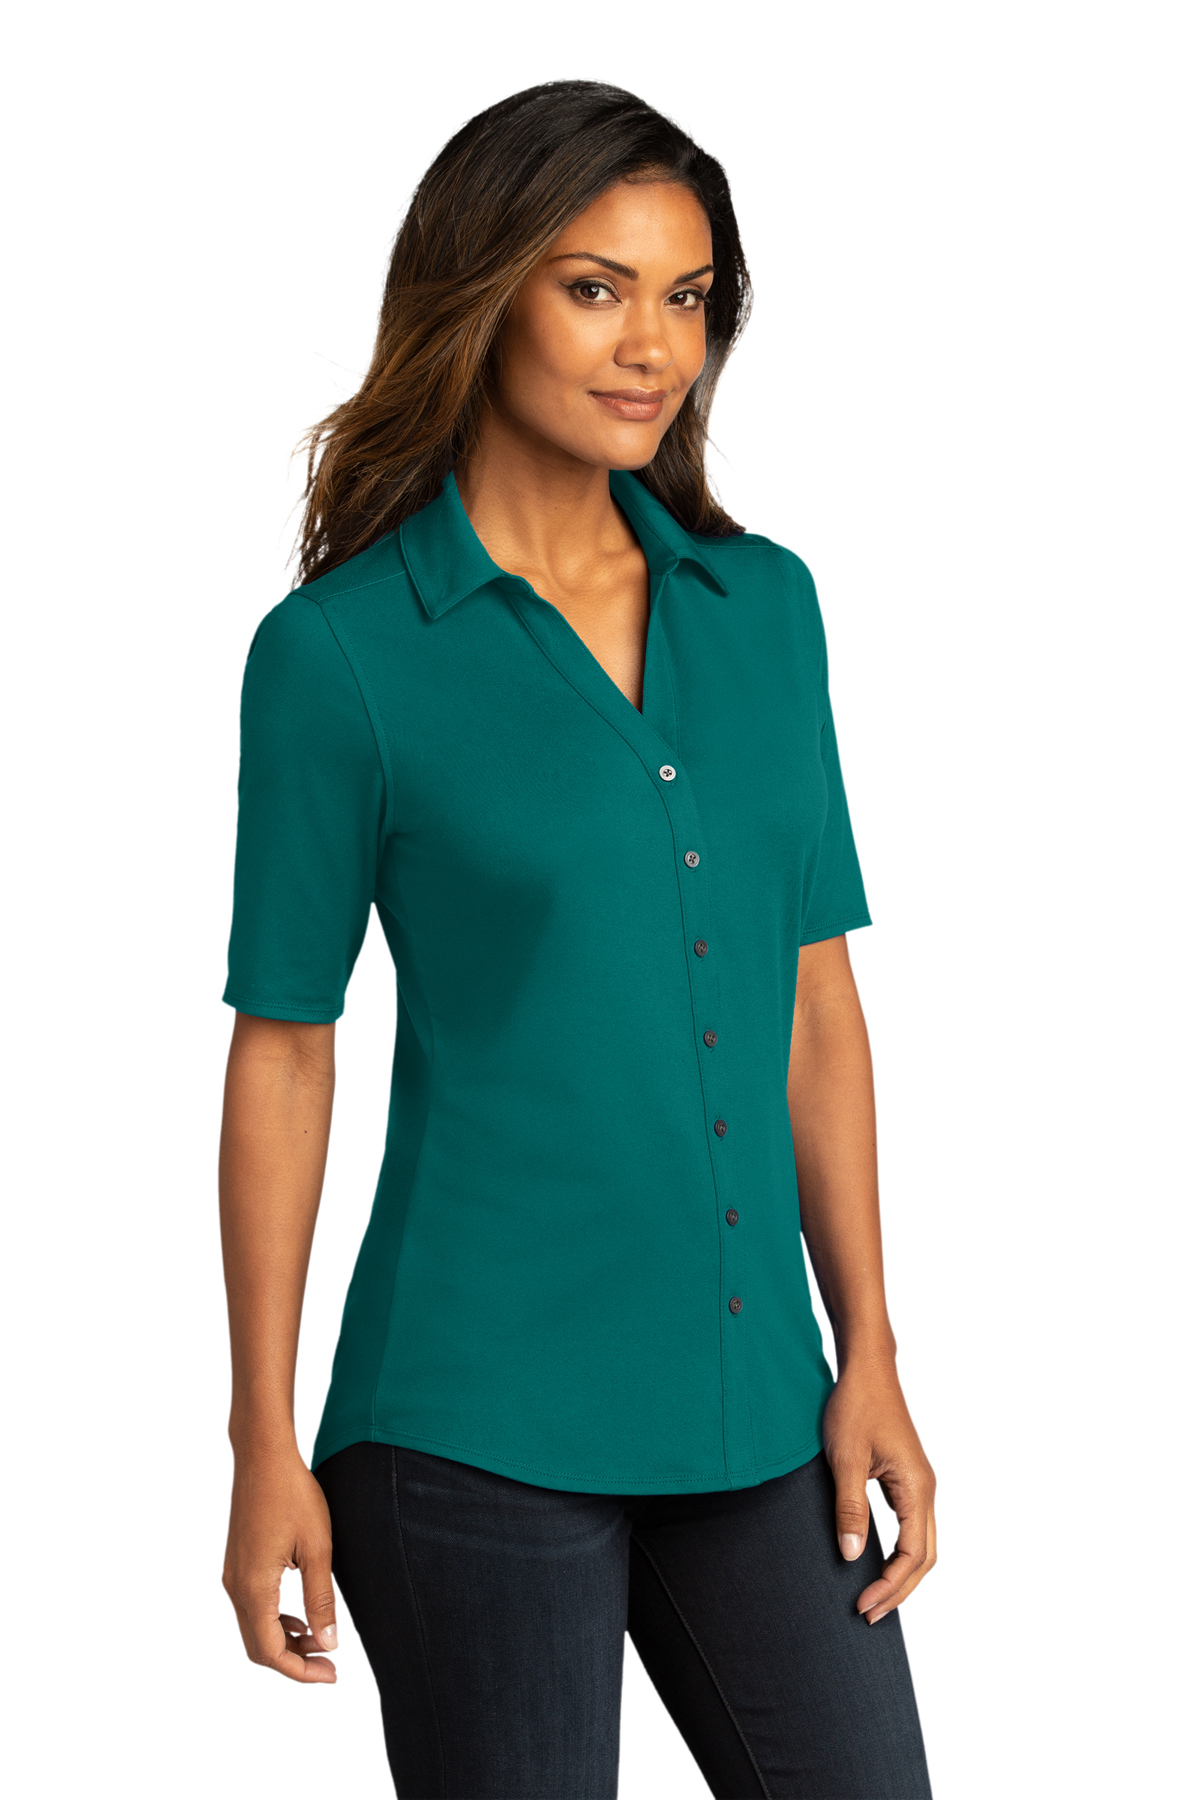 Port Authority Ladies City Stretch Top, Product